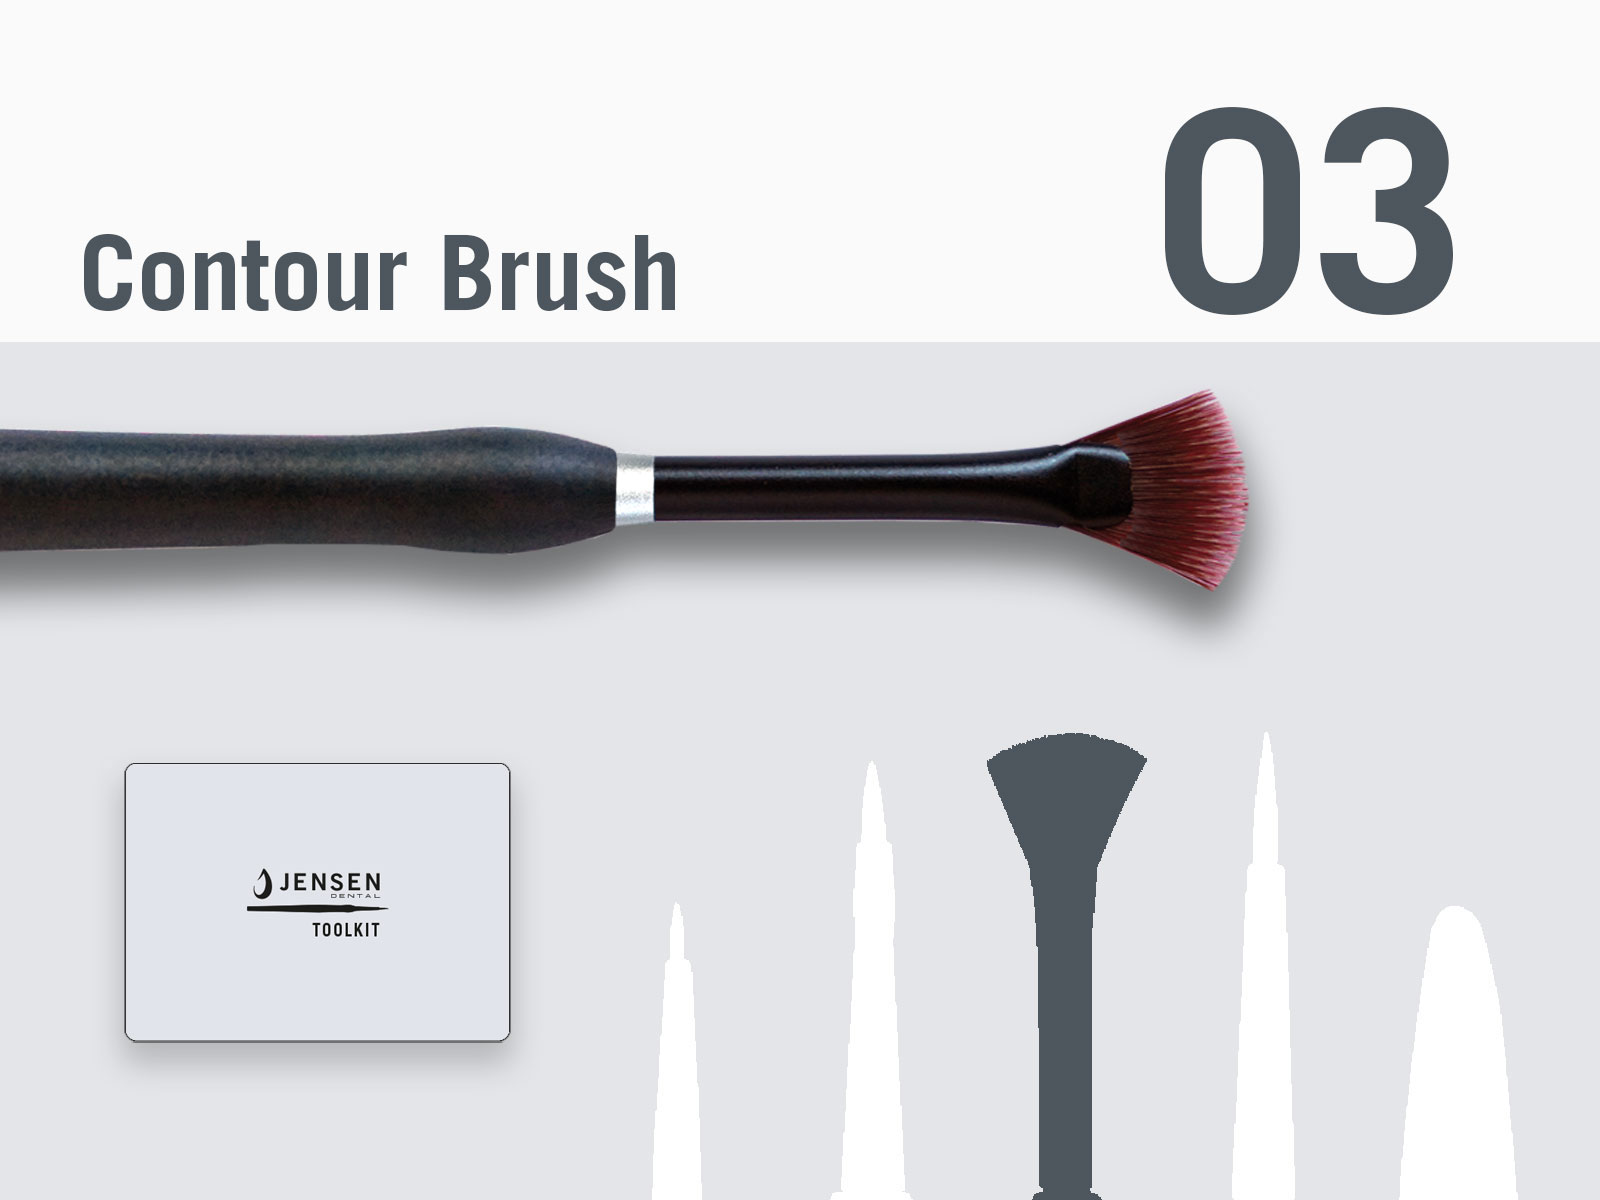 Contour brush with replaceable brush tip